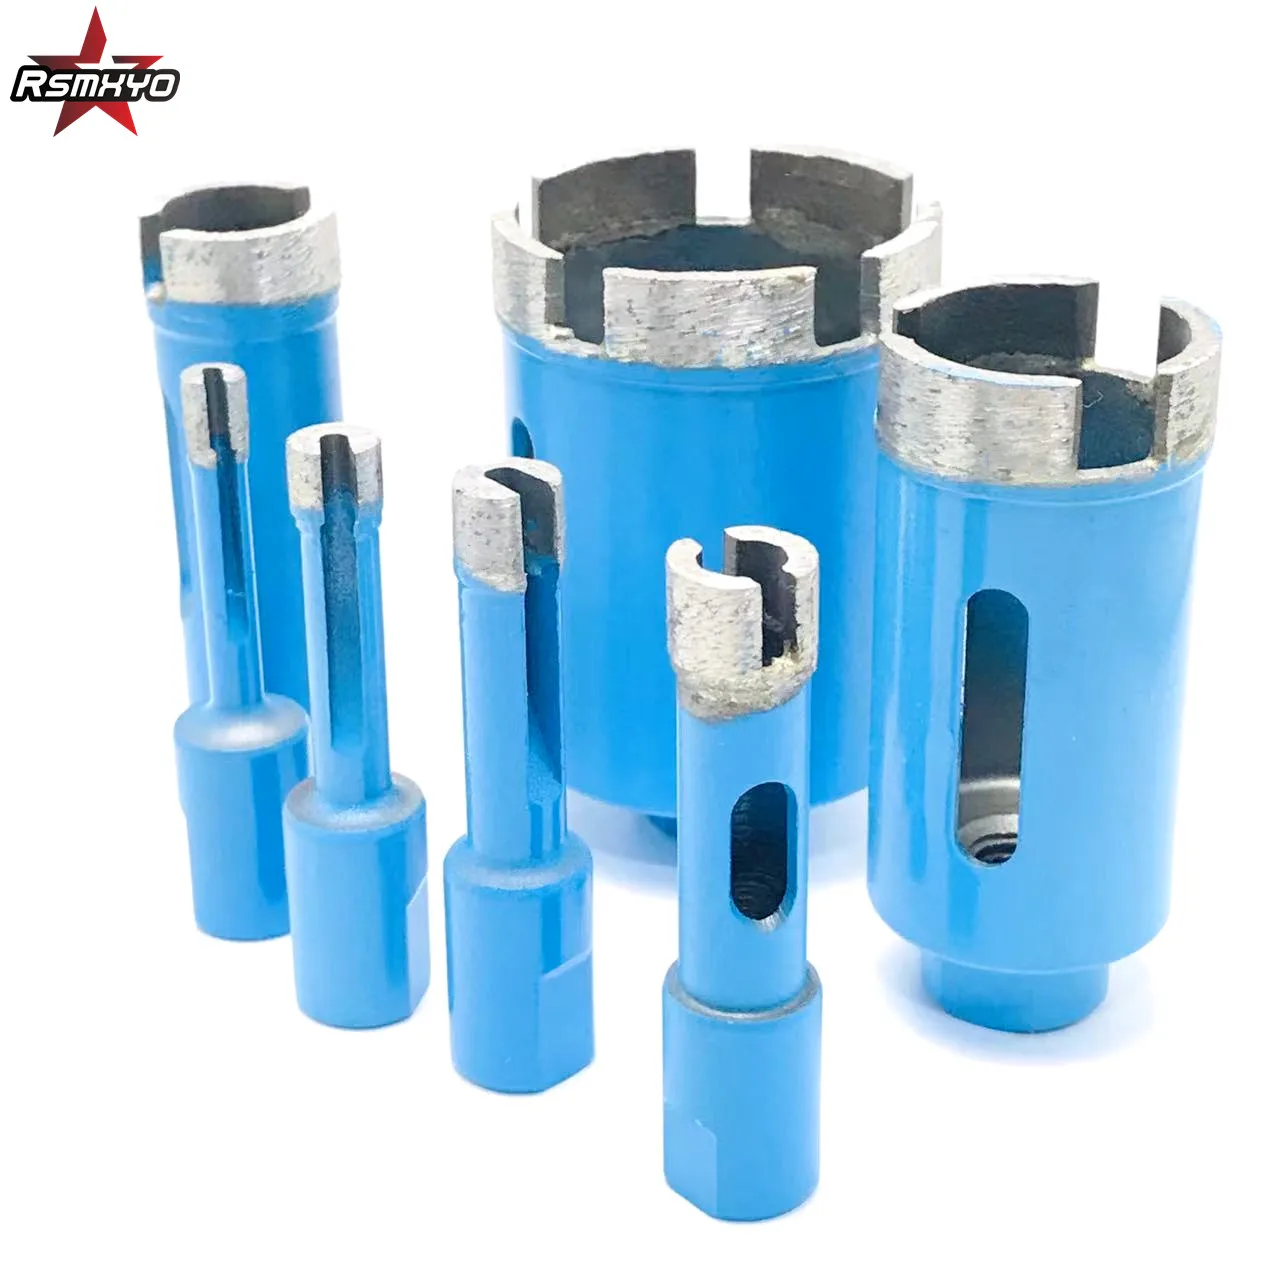 1pcs 6-75mm Diamond Drill Cutter Saw Core Drill Bit M10 Angle Grinder Hole Opener For Marble Granite Brick Tile Ceramic Concrete m10 angle grinder 6mm 65mm diamond drill cutter saw core drill bit hole opener for granite marble brick tile ceramic concrete